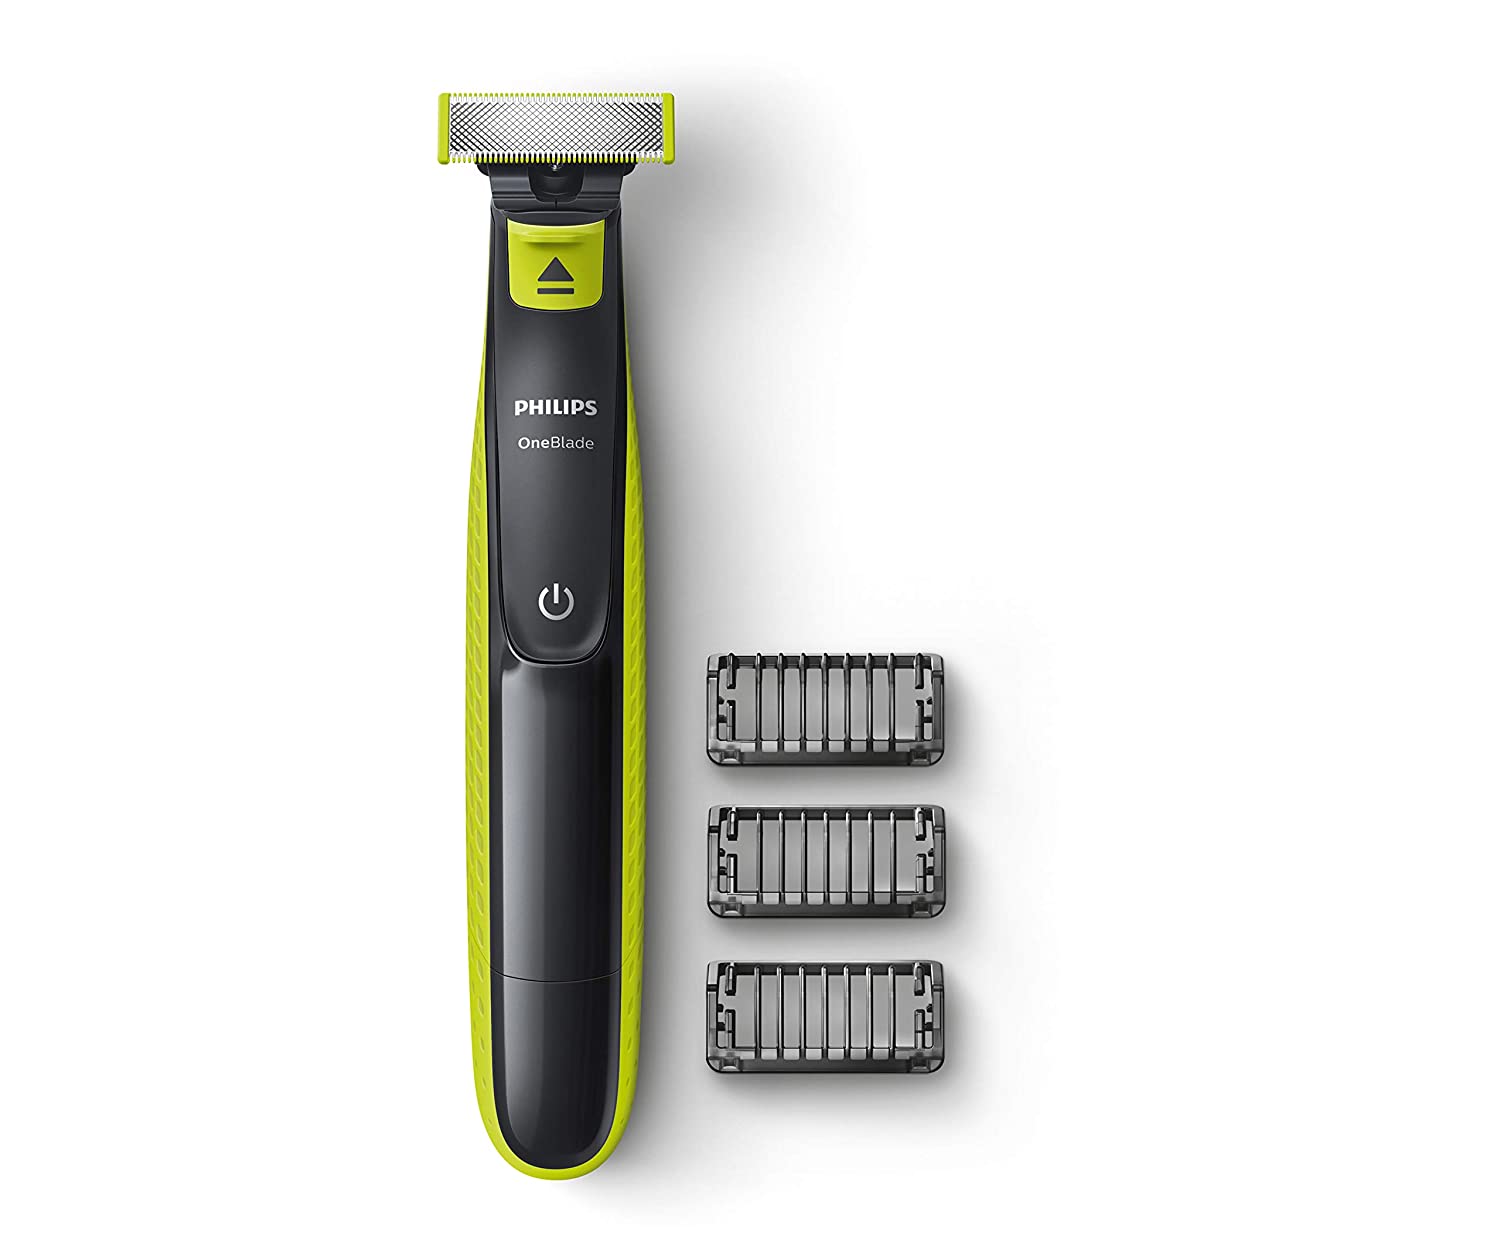 Philips QP2525/10 OneBlade Hybrid Trimmer and Shaver with 3 Trimming Combs